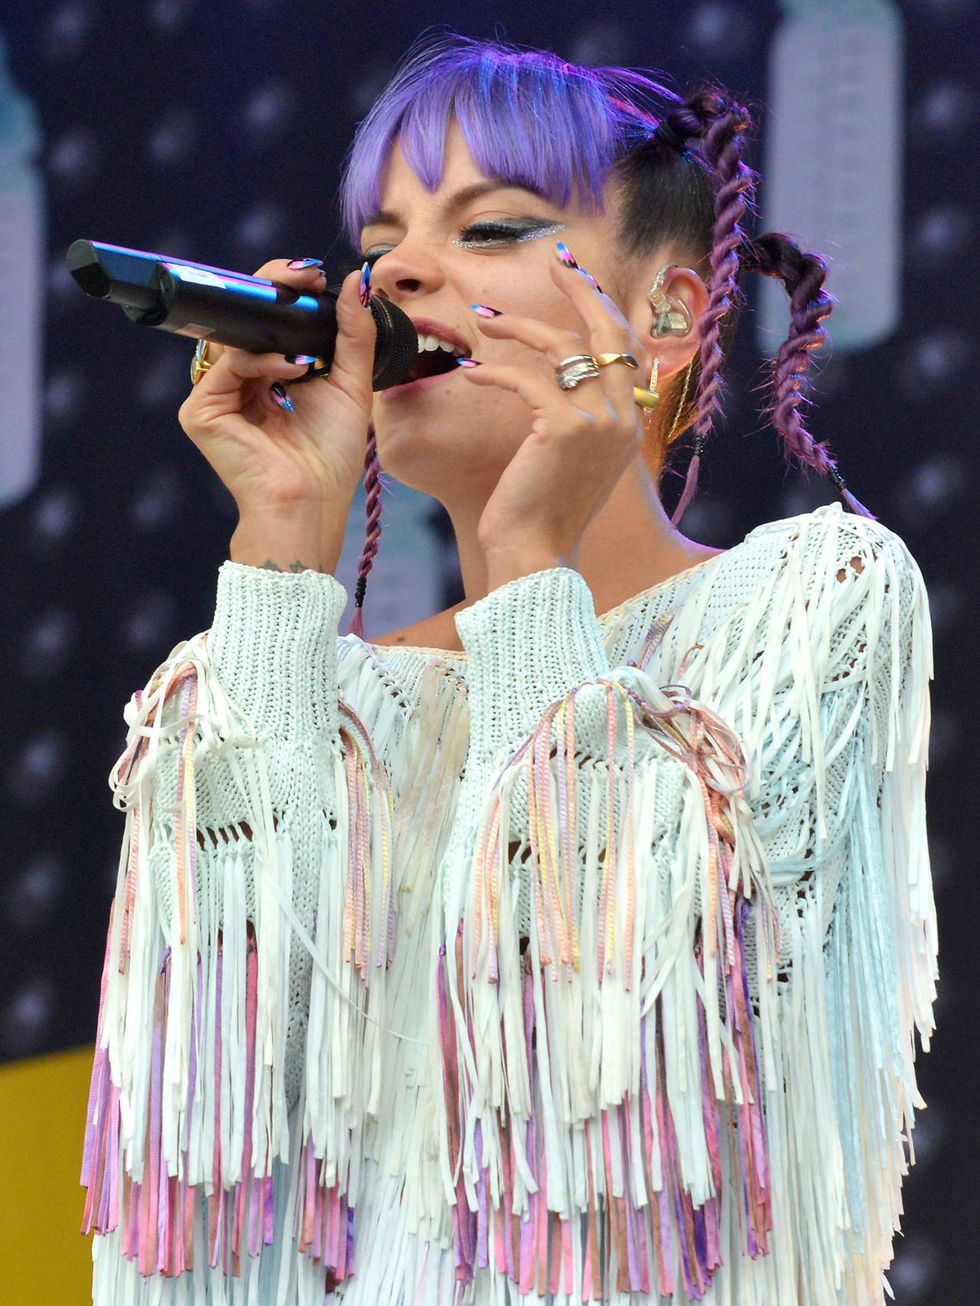 Lily Allen at Electric Picnic festival 2014